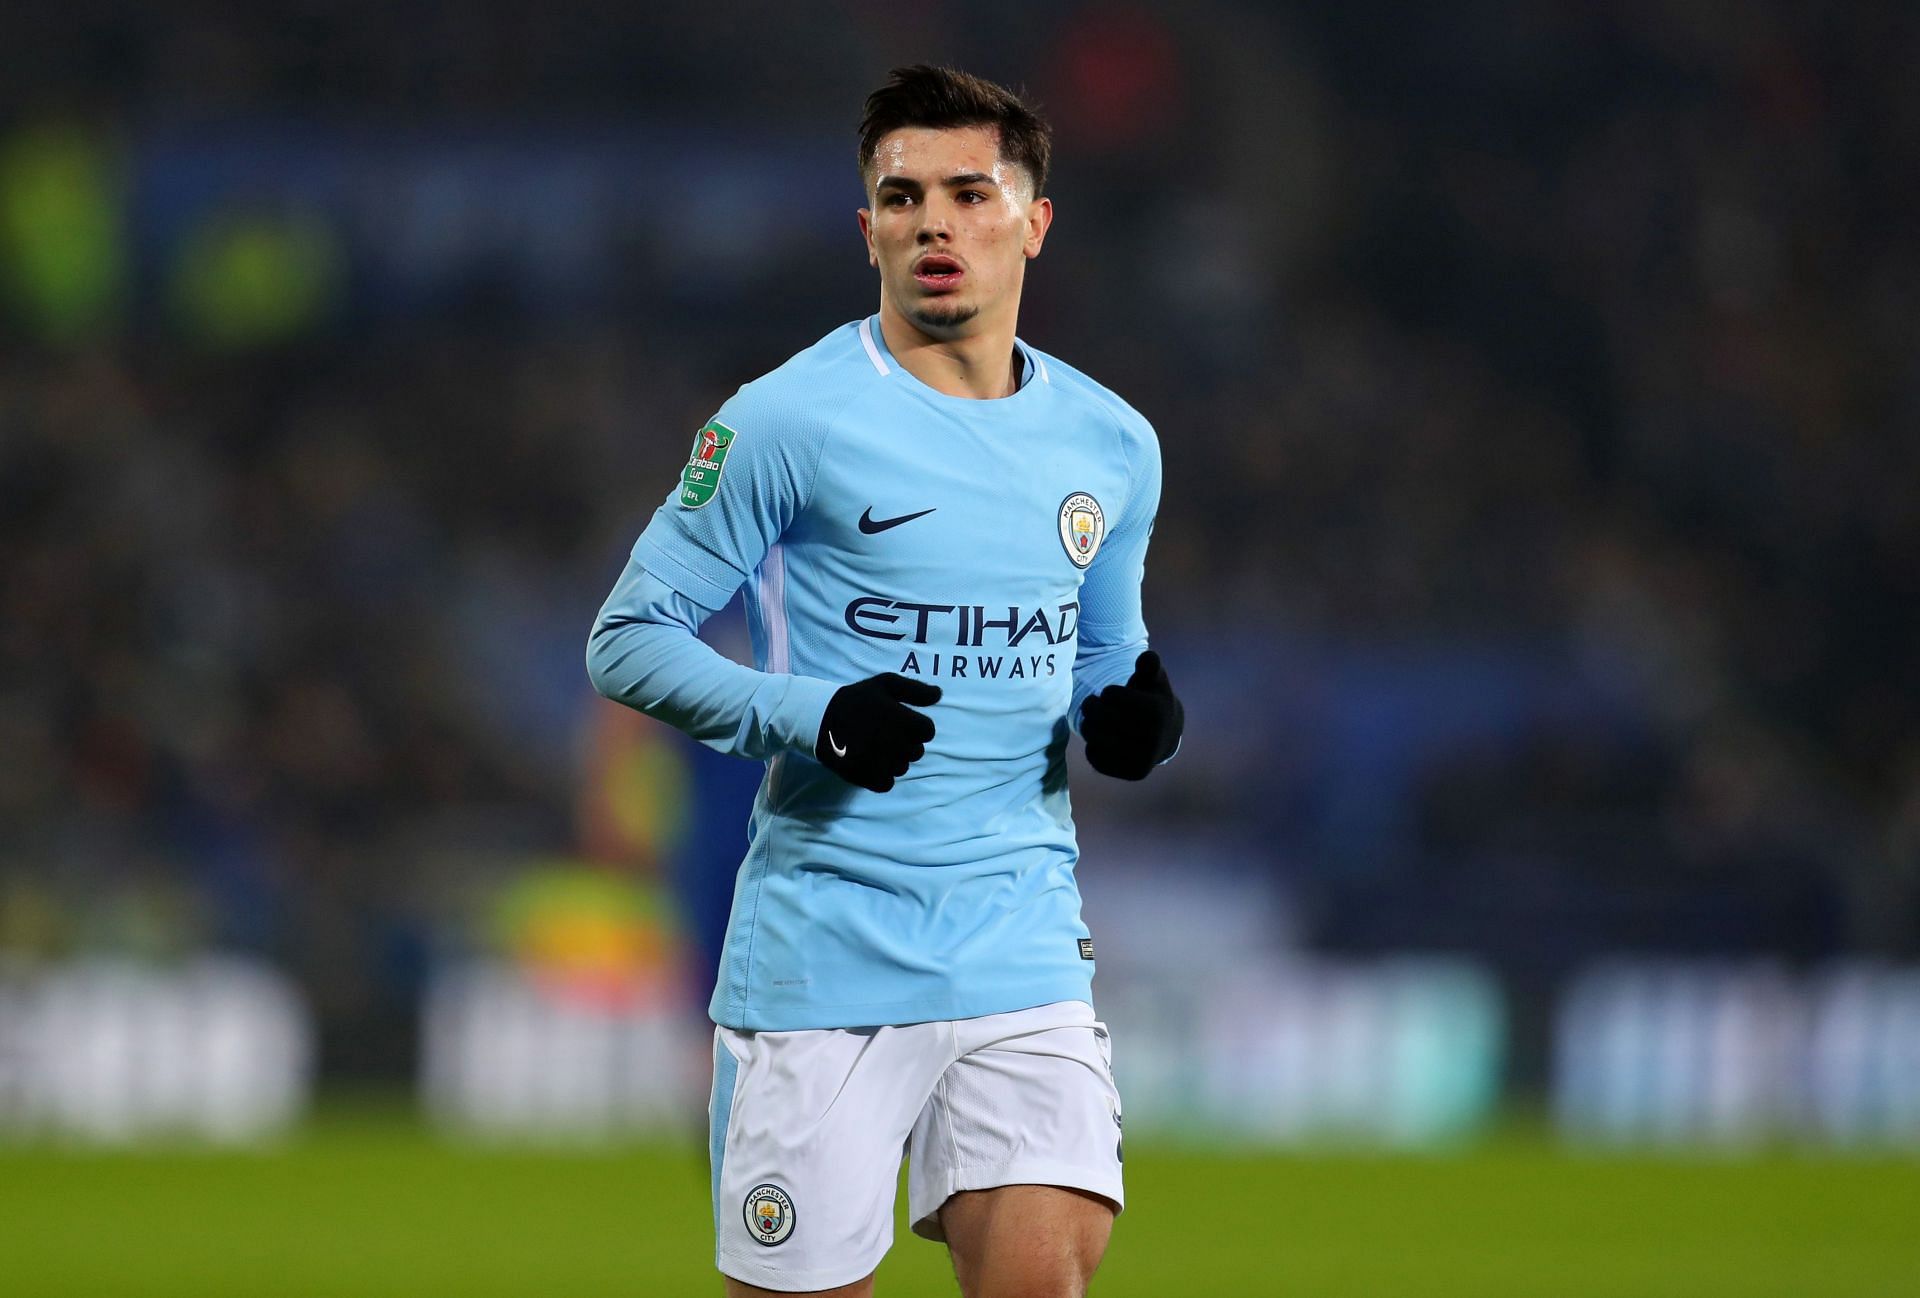 Brahim Diaz is not remembered for his exploits for Man City